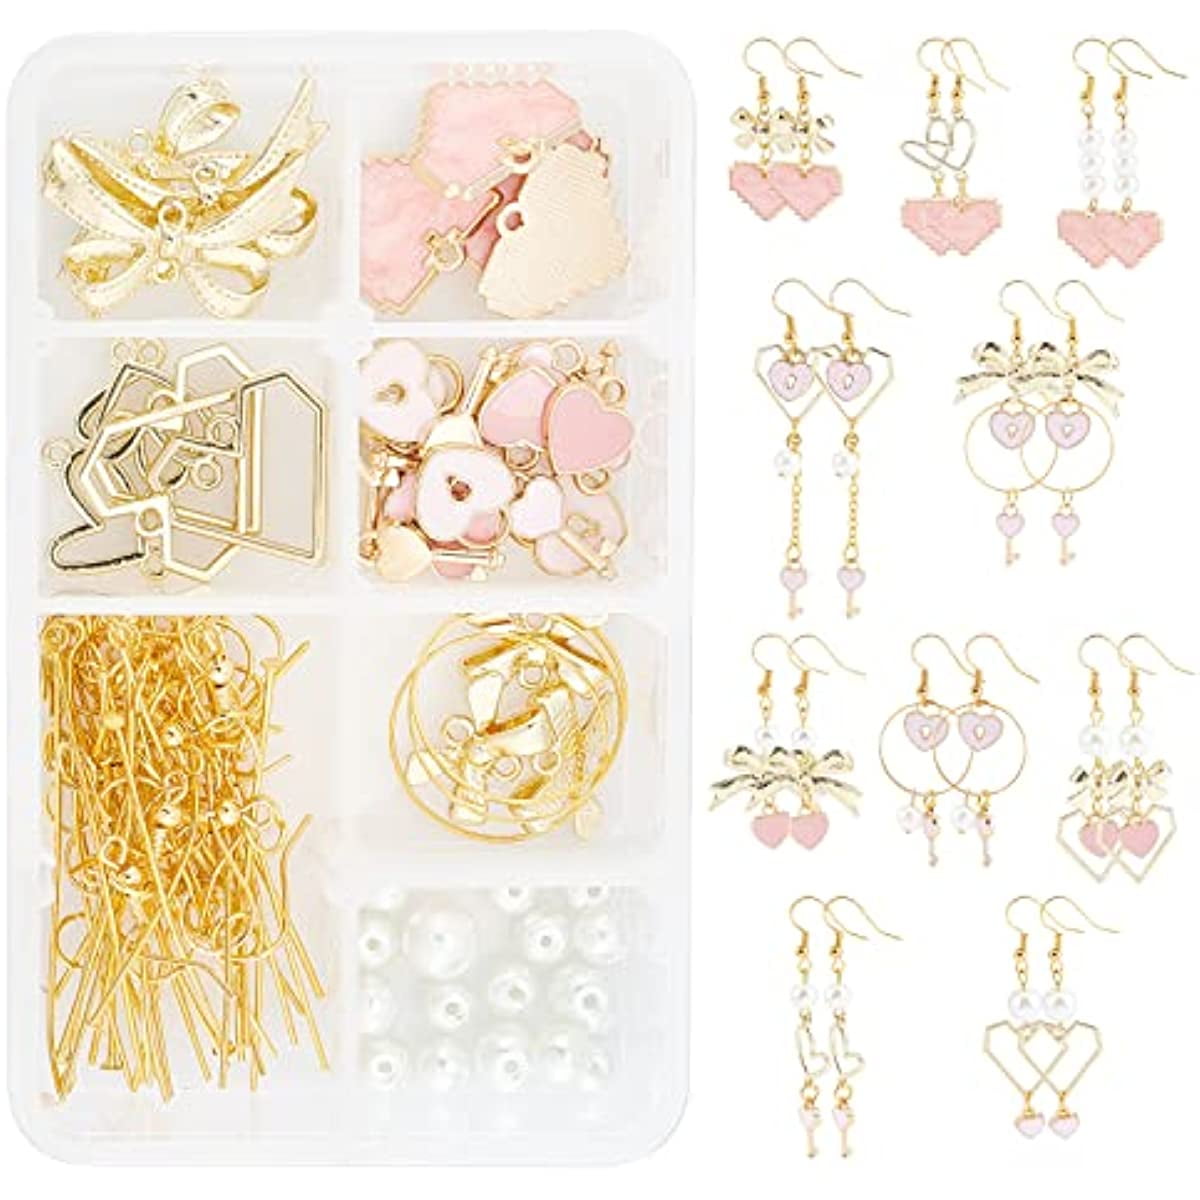 FREEBLOSS 12 Sets Earring Making Kit Earring Making Kit Earring Kits for  Jewelry Making DIY Earring Supplies for Adults Beginners Birthday Gift